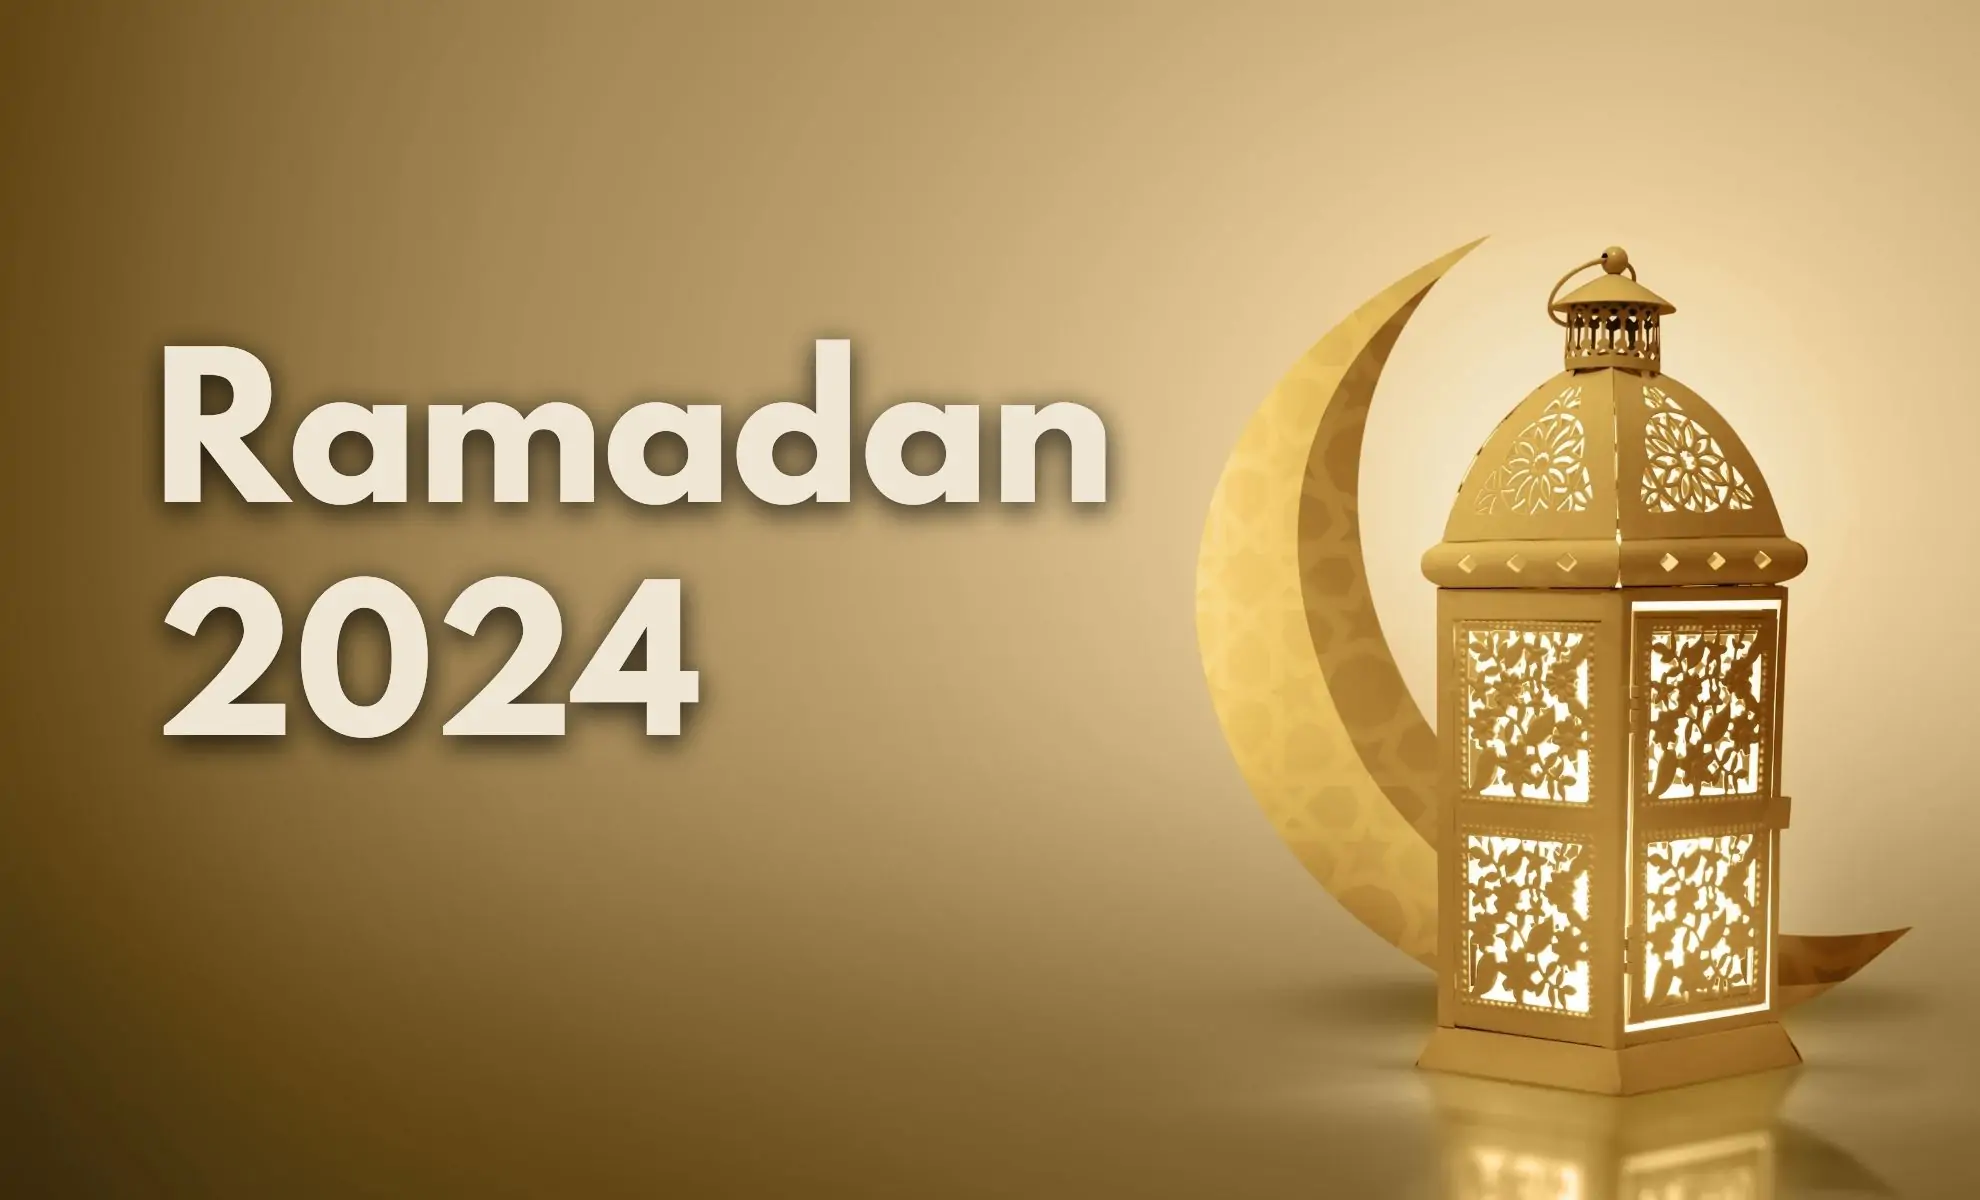 Local Ramadan observance likely to start March 12 - Barbados Today